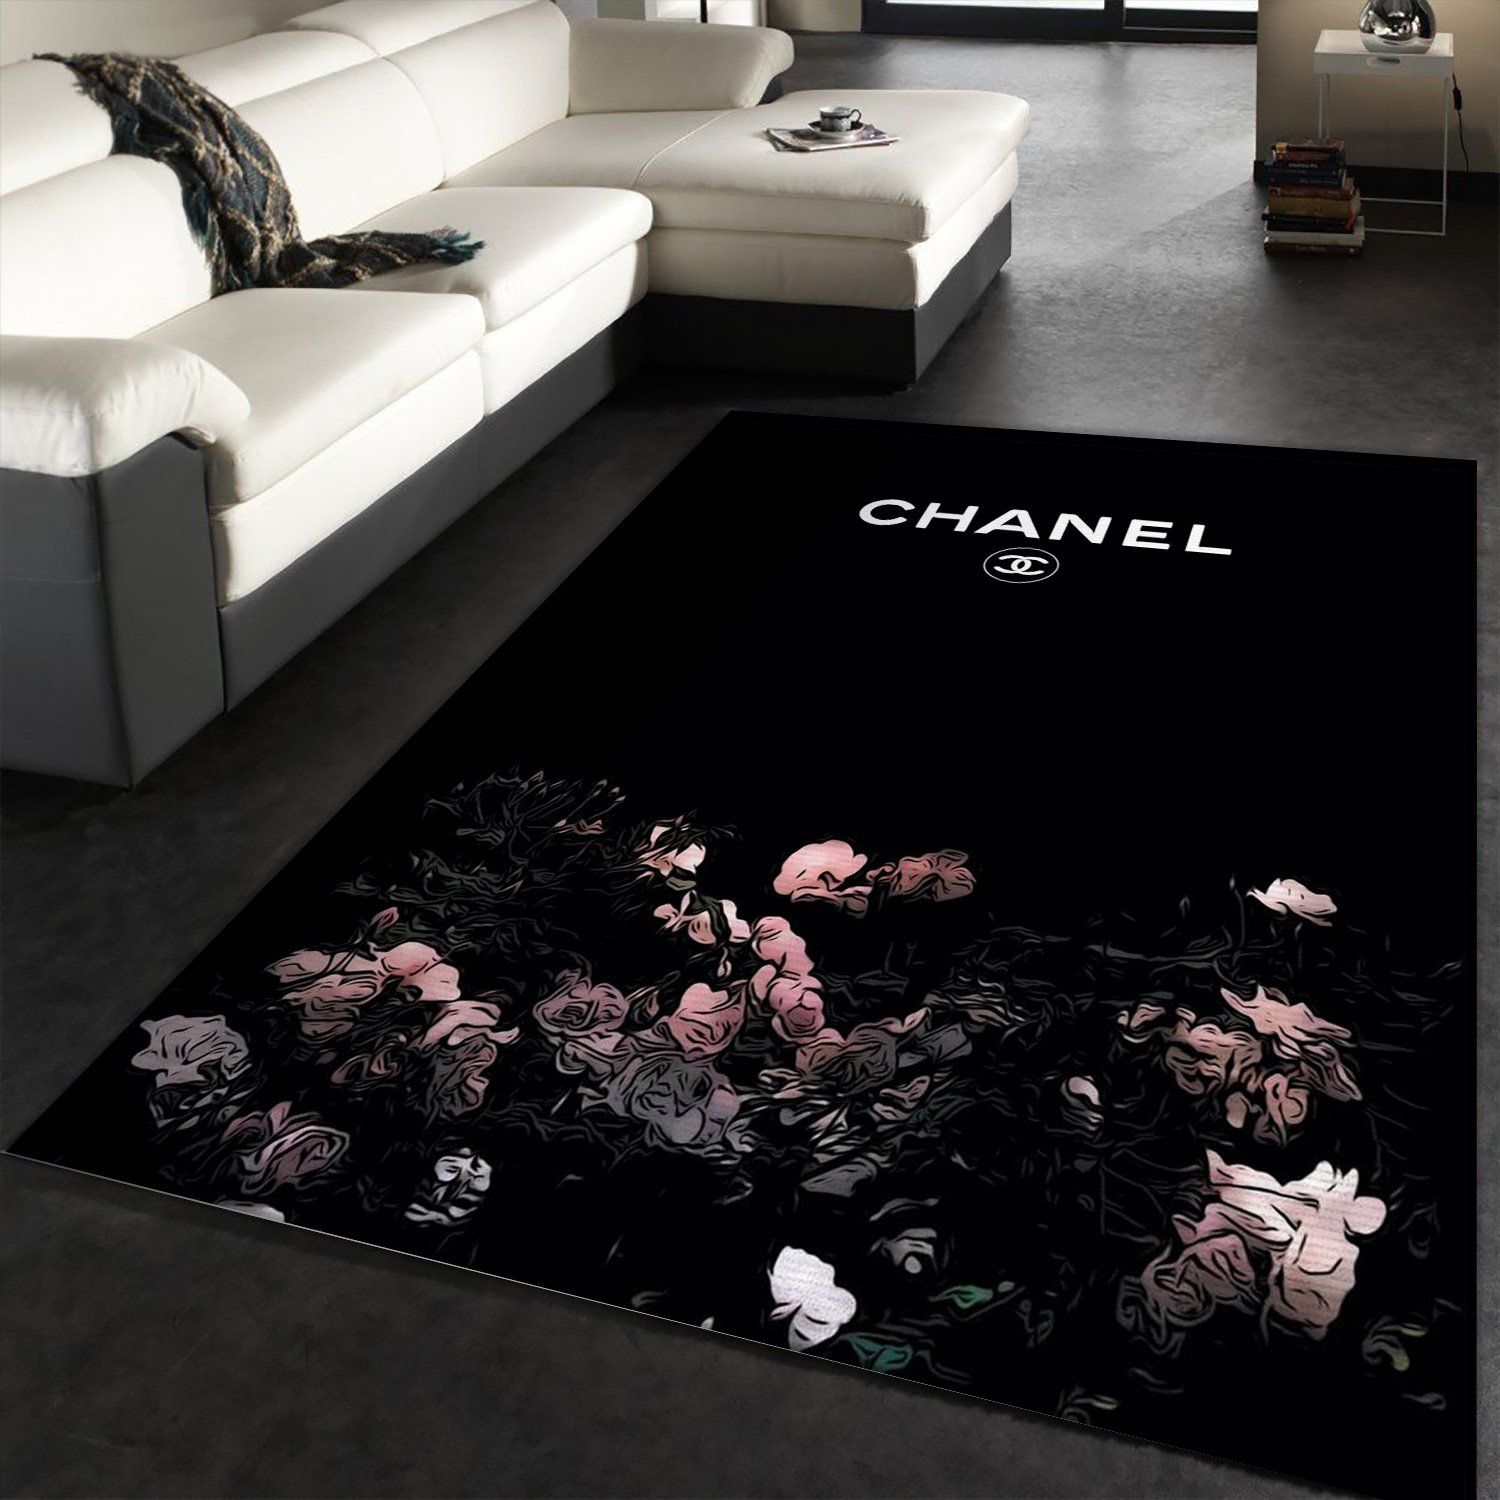 Chanel Home